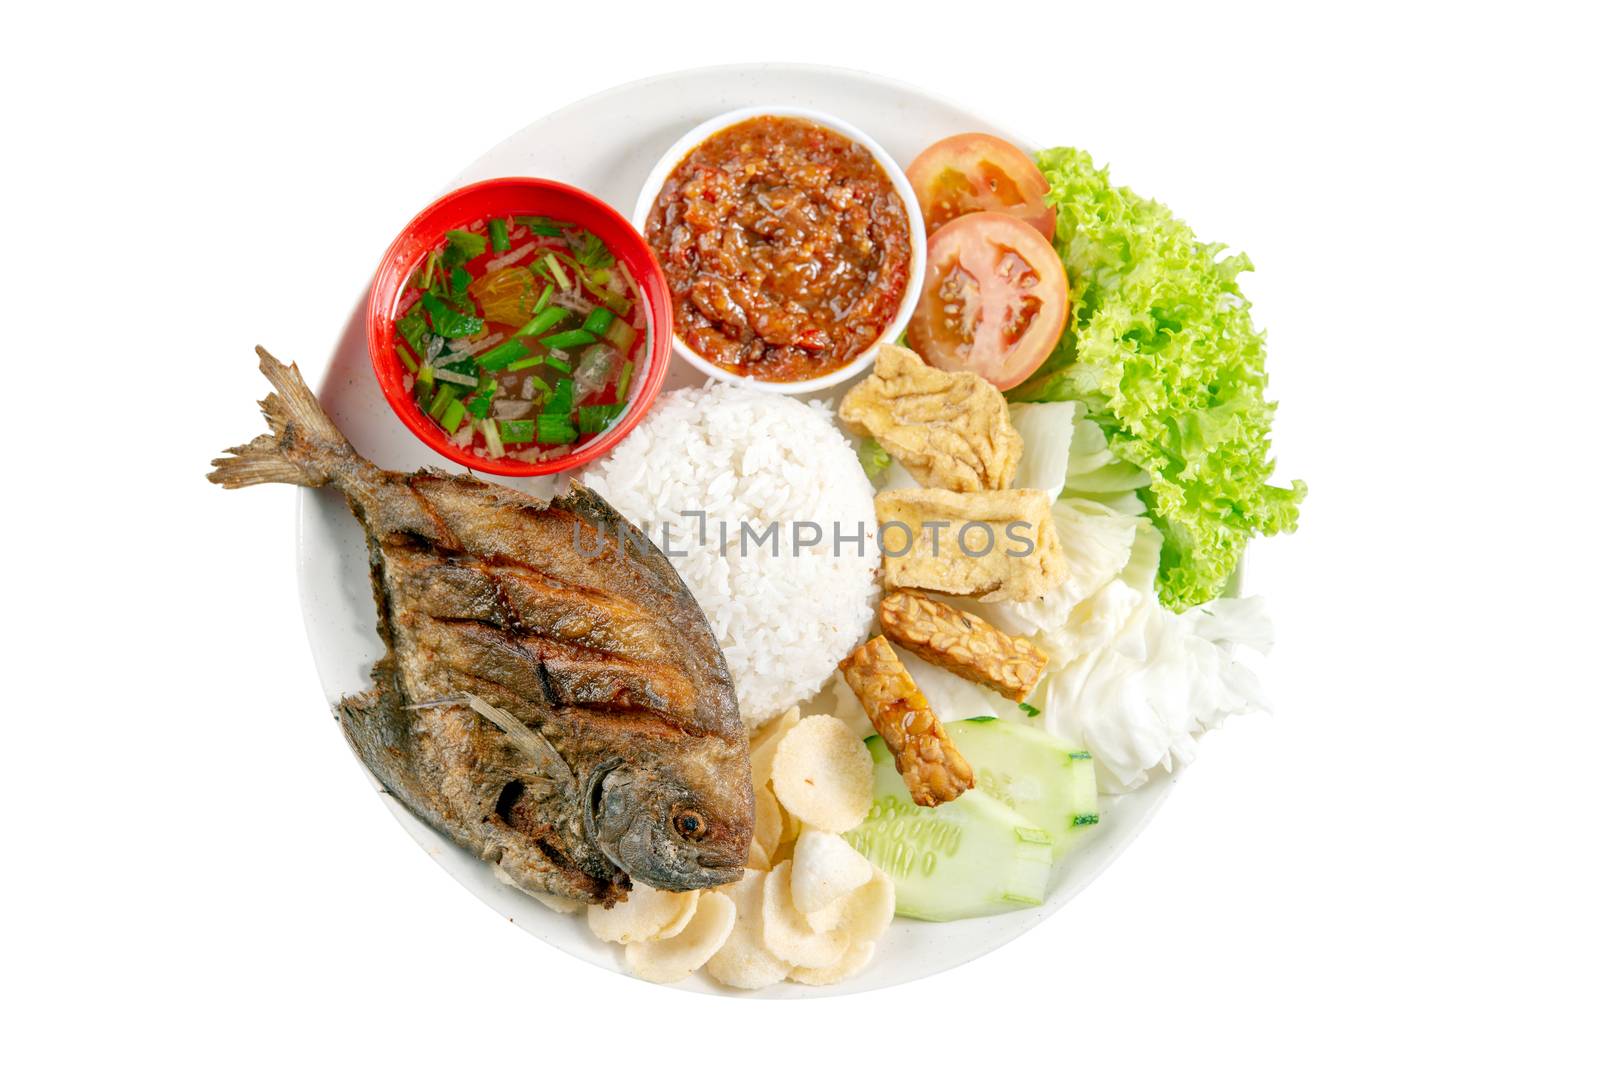 Fried pomfret fish and rice, popular traditional Malay or Indonesian local food. Isolated on white background. Flat lay top down overhead view.